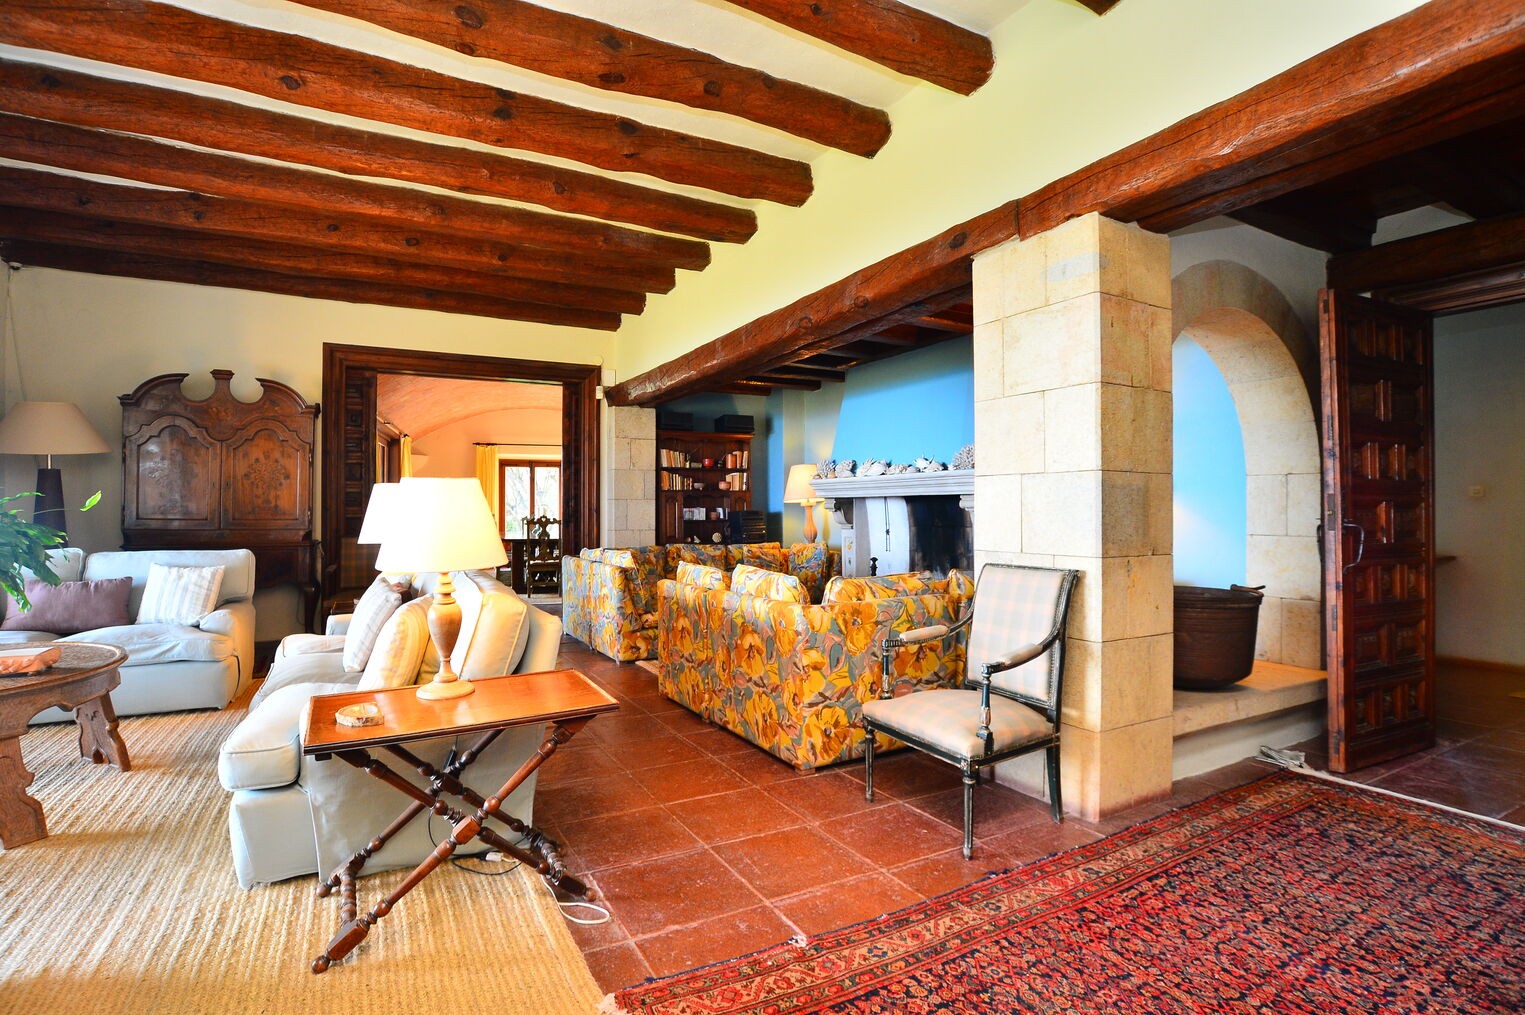 Beautiful catalan style rustic house